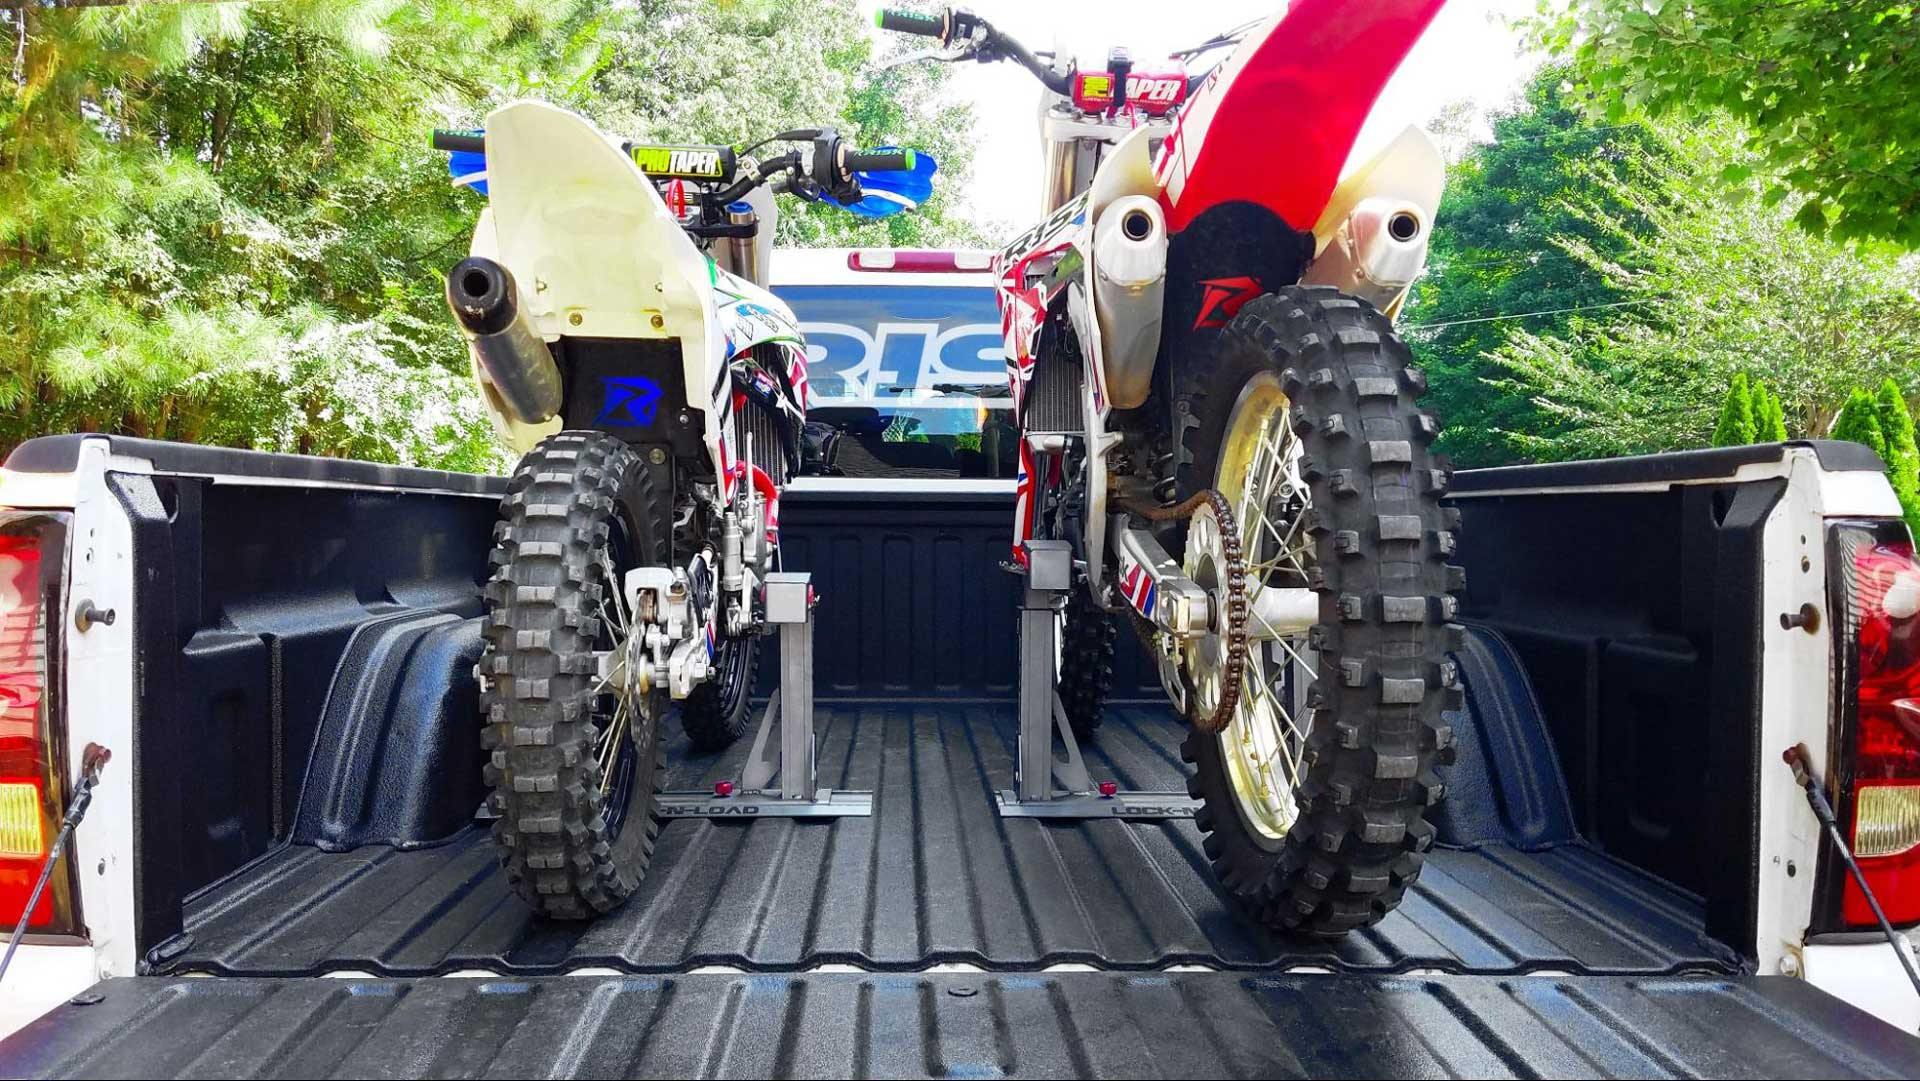 How Do You Load 3 Dirt Bikes In A Truck? - Risk Racing